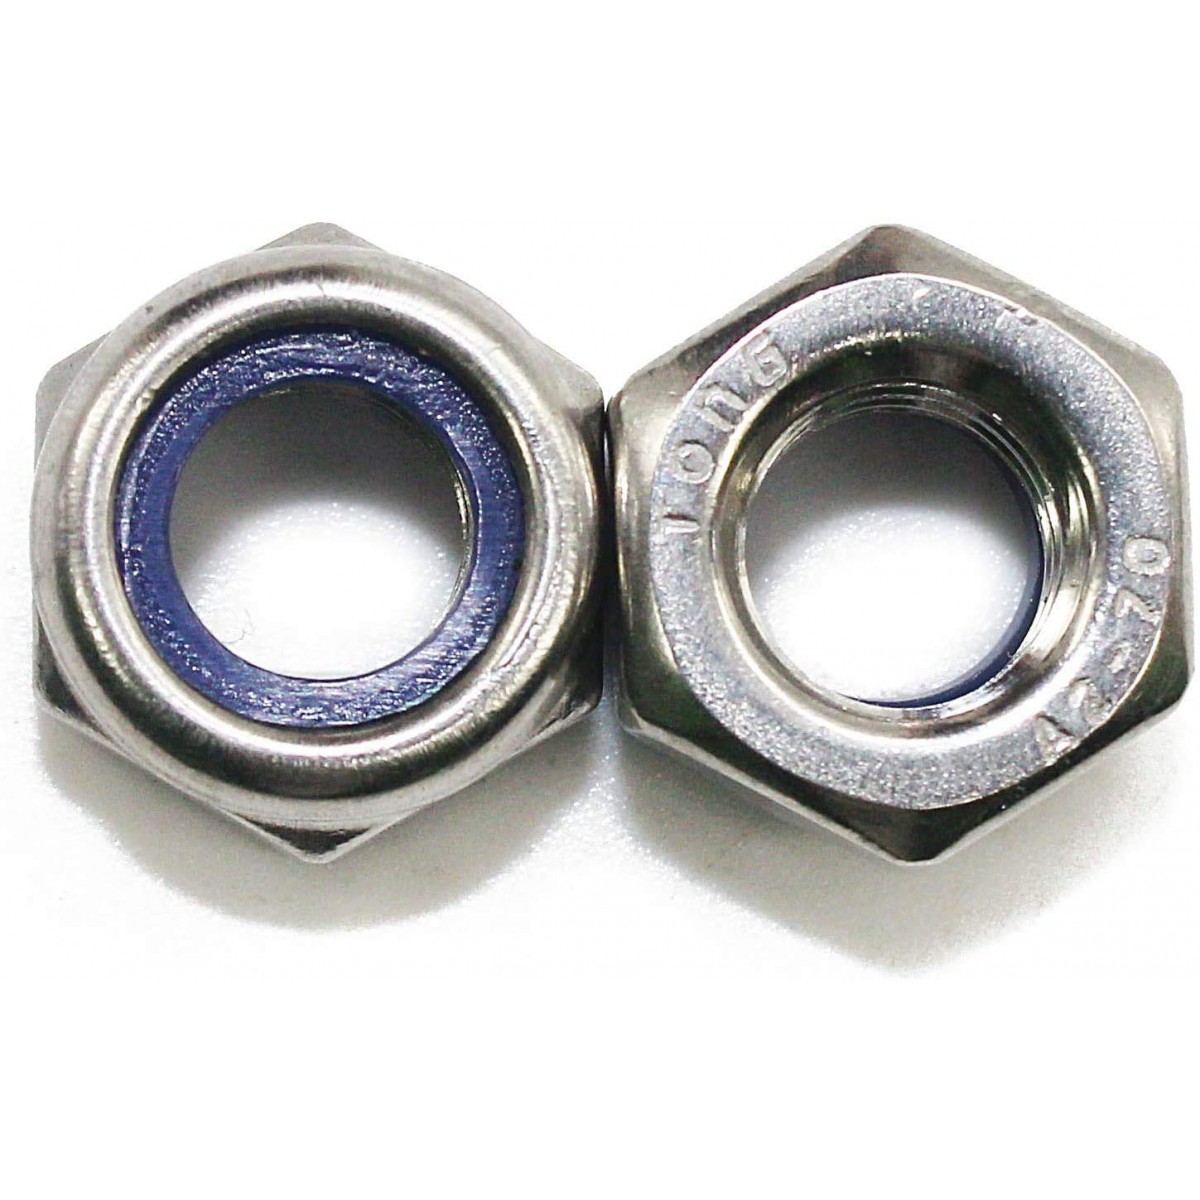 Details about   M4 to M12 Left-Hand Thread Hex Nyloc Nylon Insert Locking Nuts A2 304 Stainless 